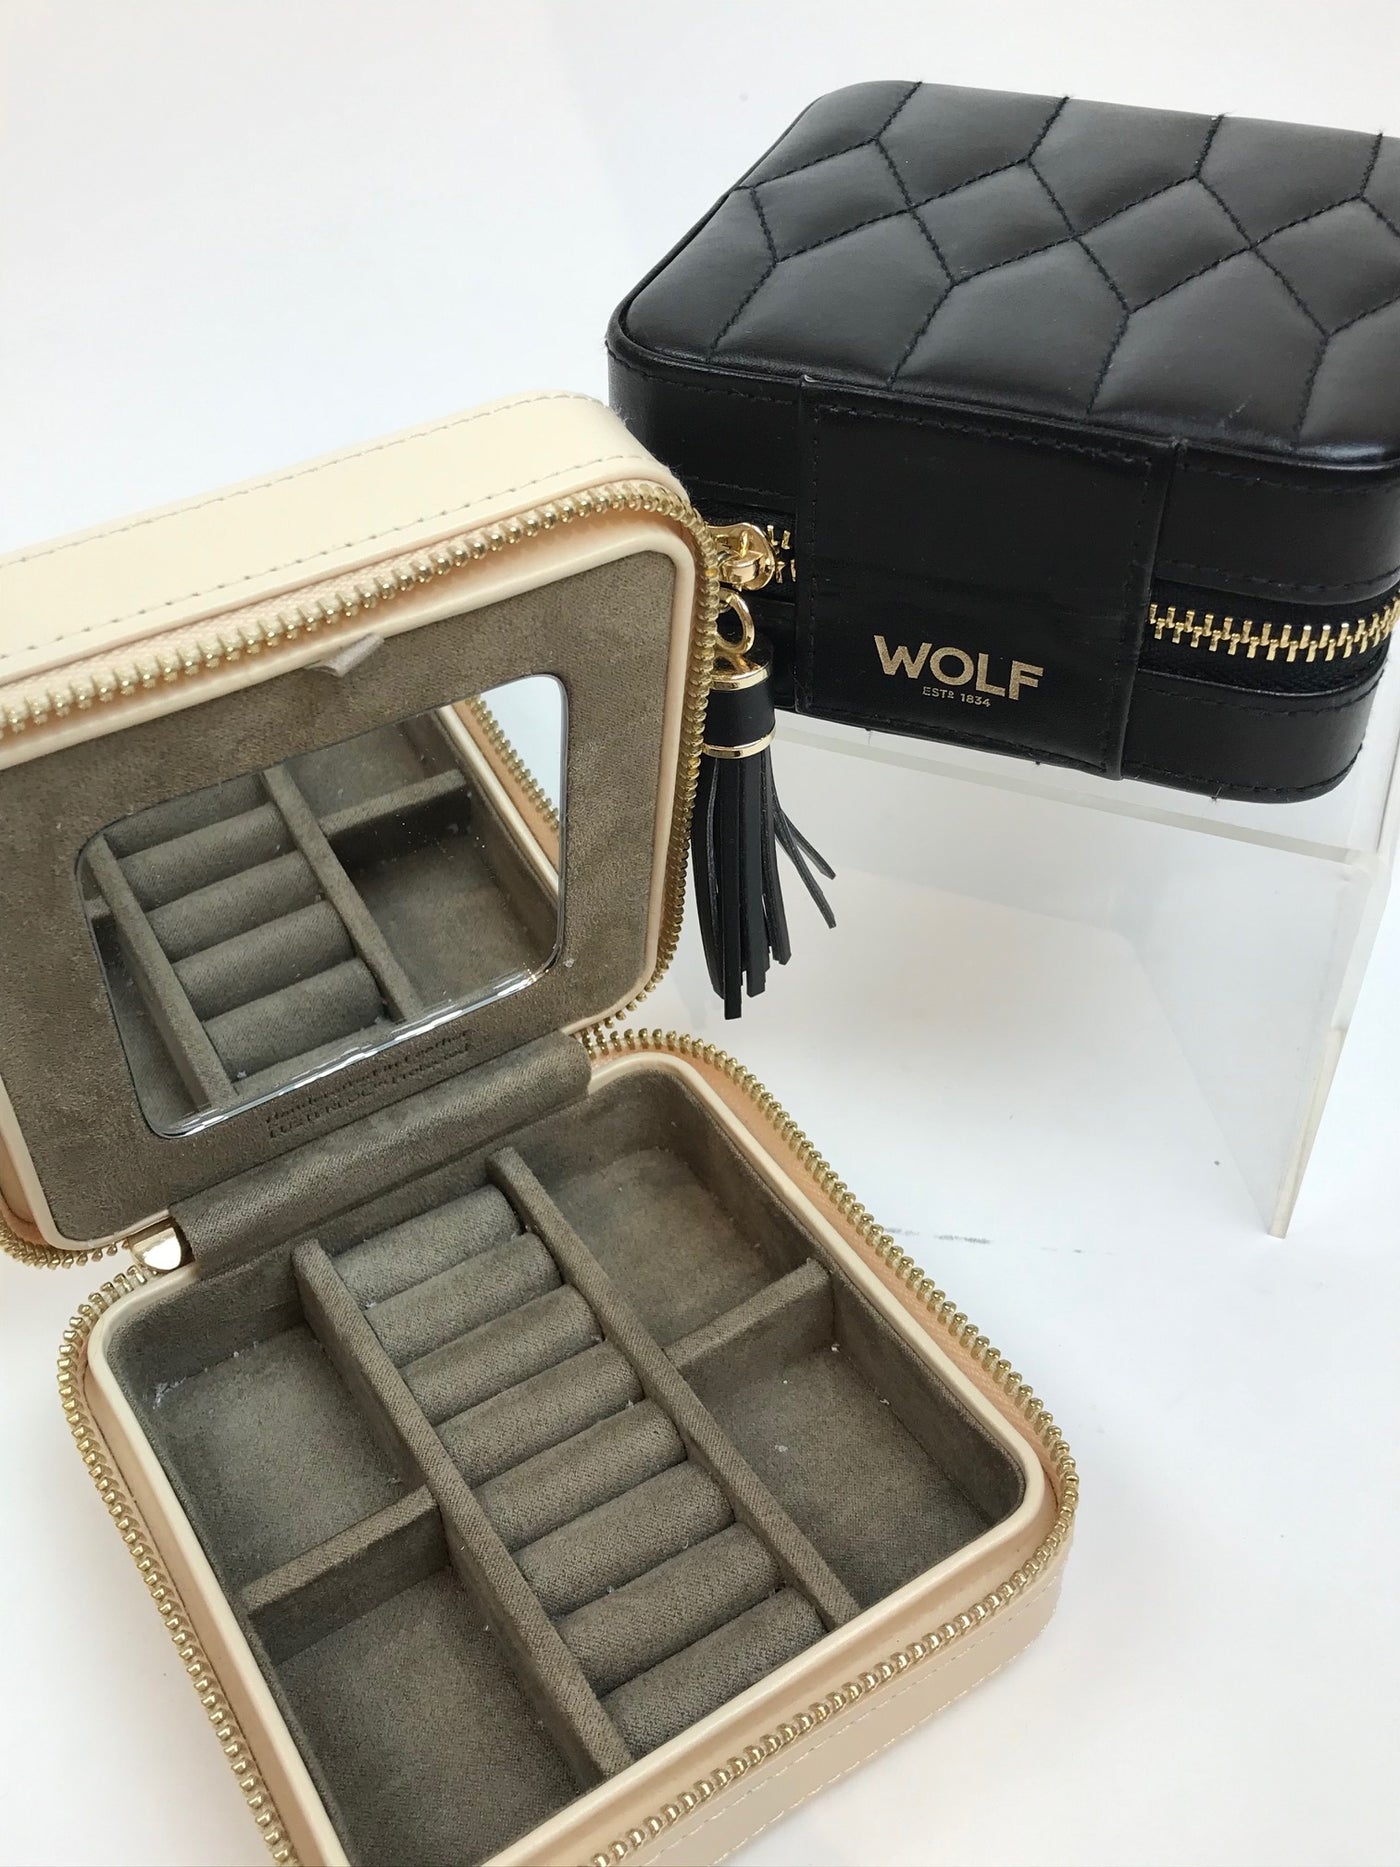 Wolf Leather Travel case